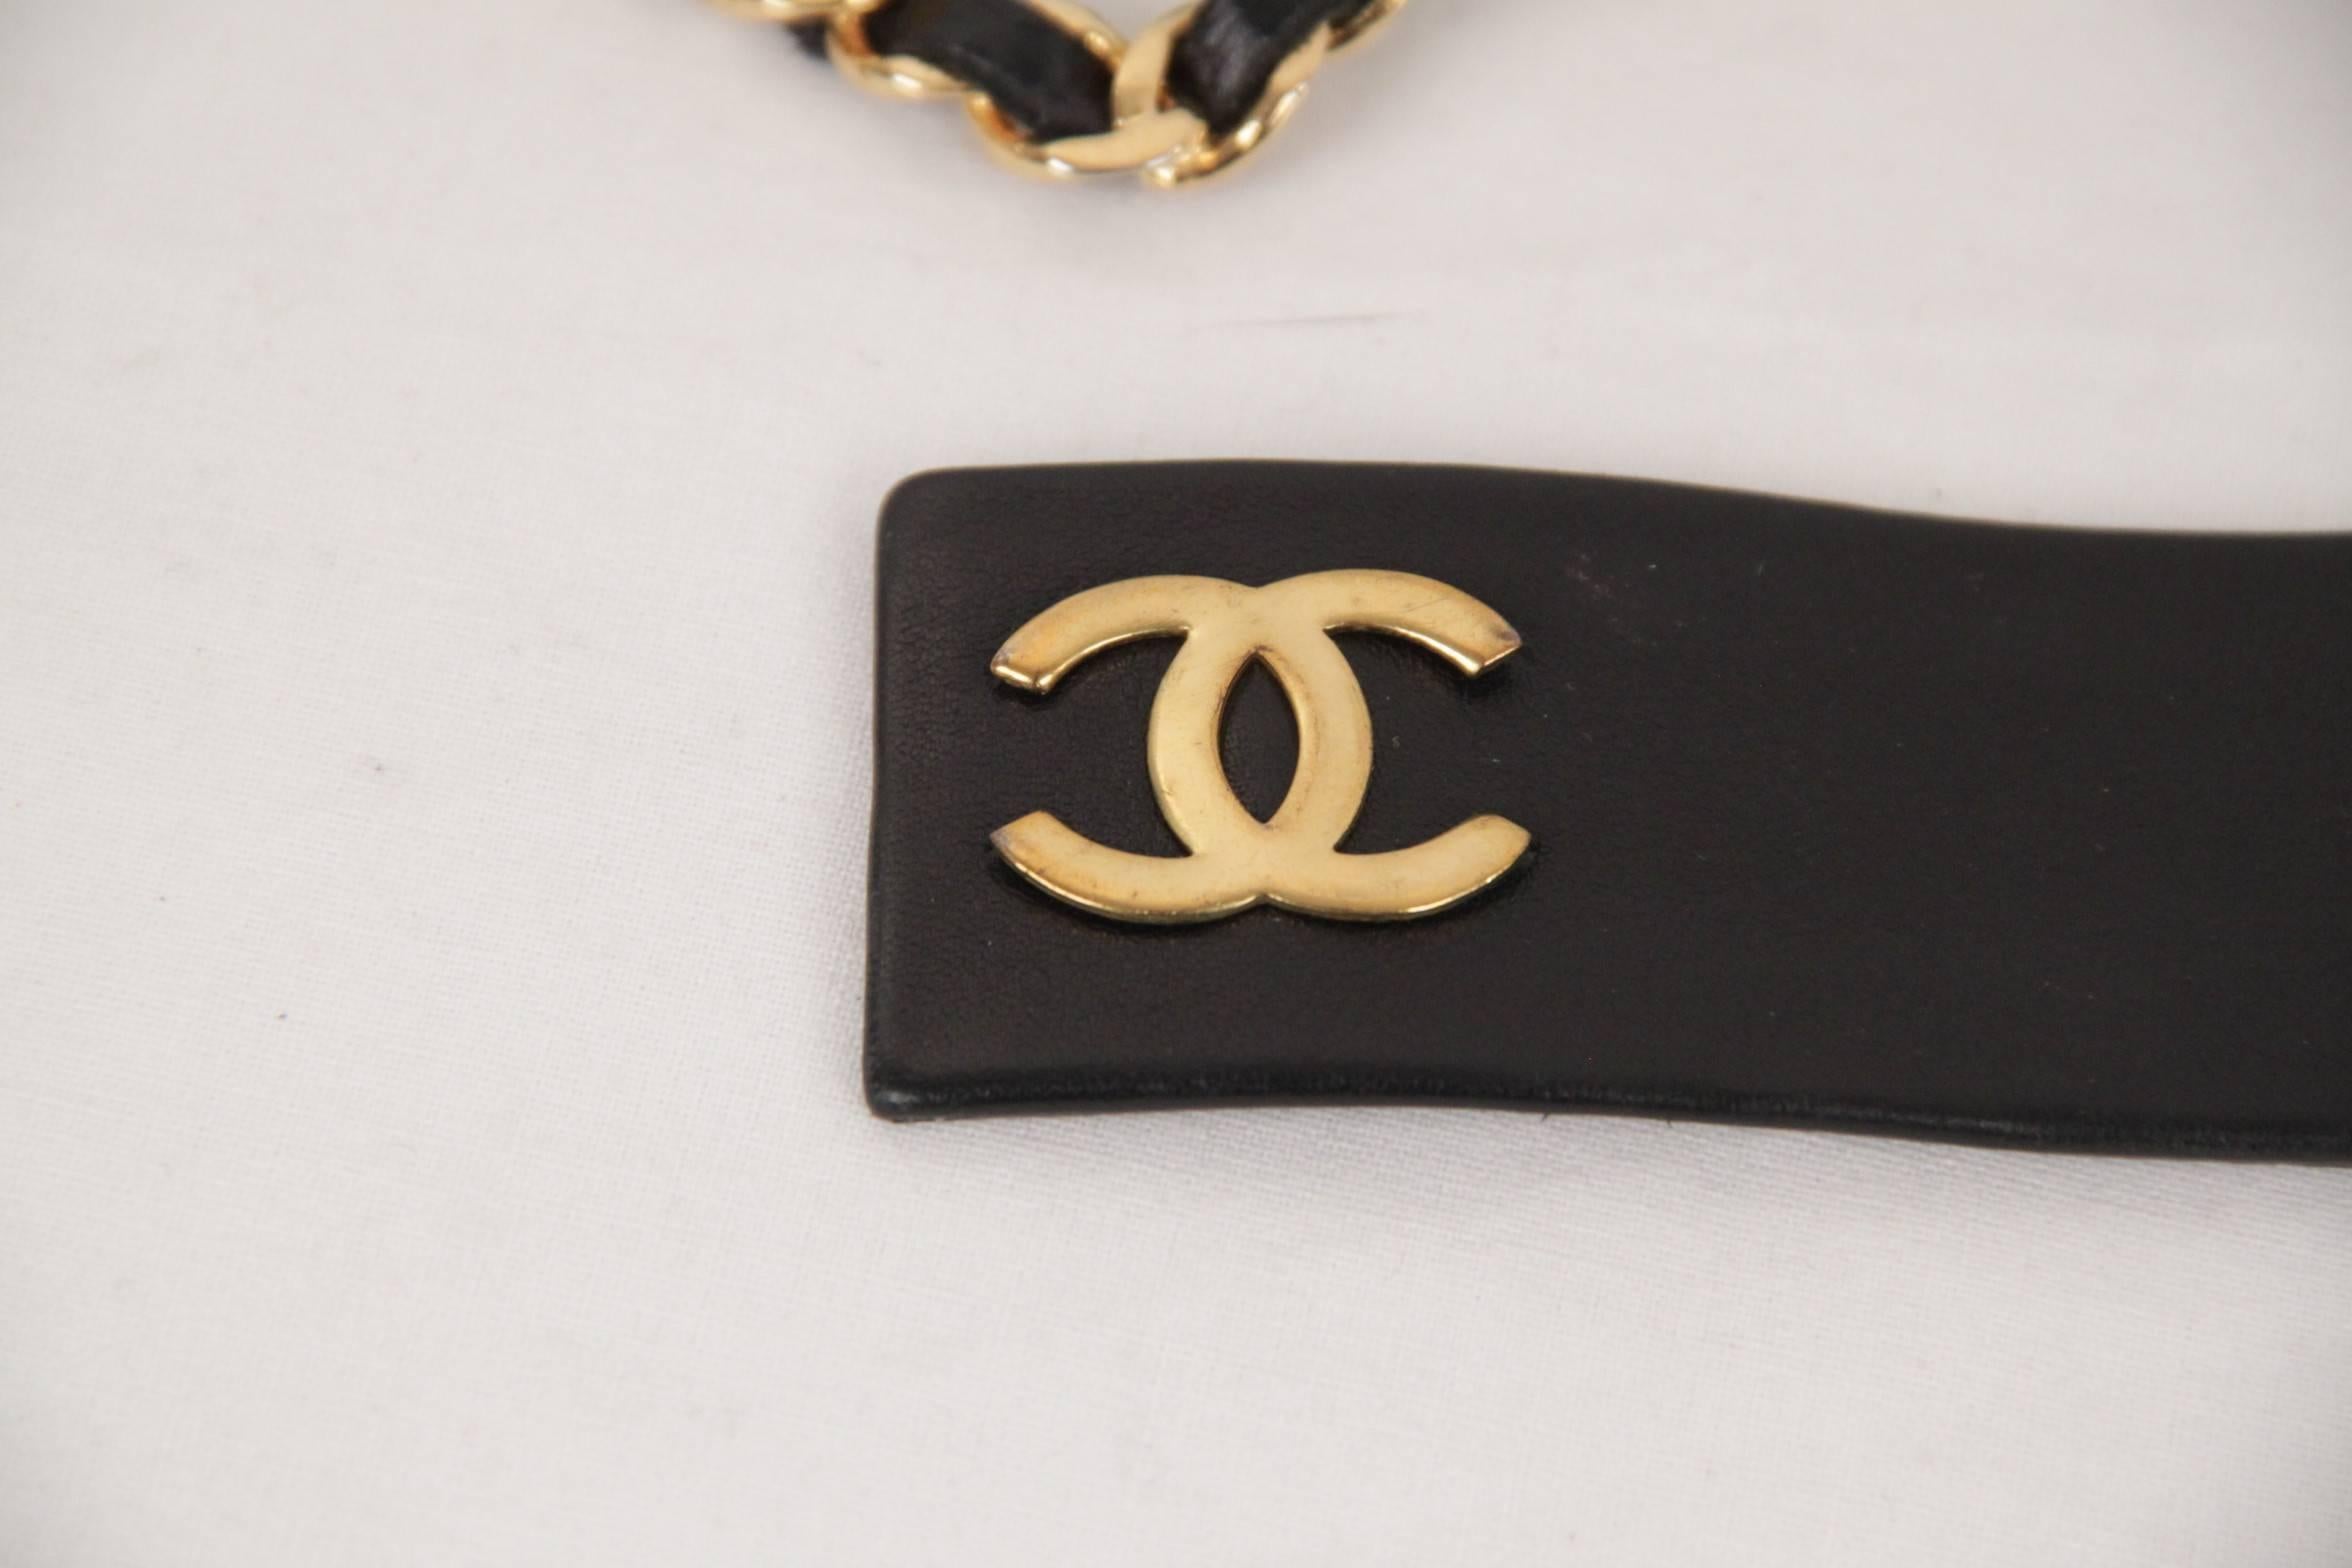 - Vintage leather & gold metal chain belt by CHANEL 

- Color: Gold / Black

- Gold metal CC - CHANEL logos

- Interwoven chain buckle closure

- Total lenght: 33 1/4 inches - 84,4 cm 

- Size: 70/28

Logos & tag: ''CHANEL 2 CC 6 - Made in